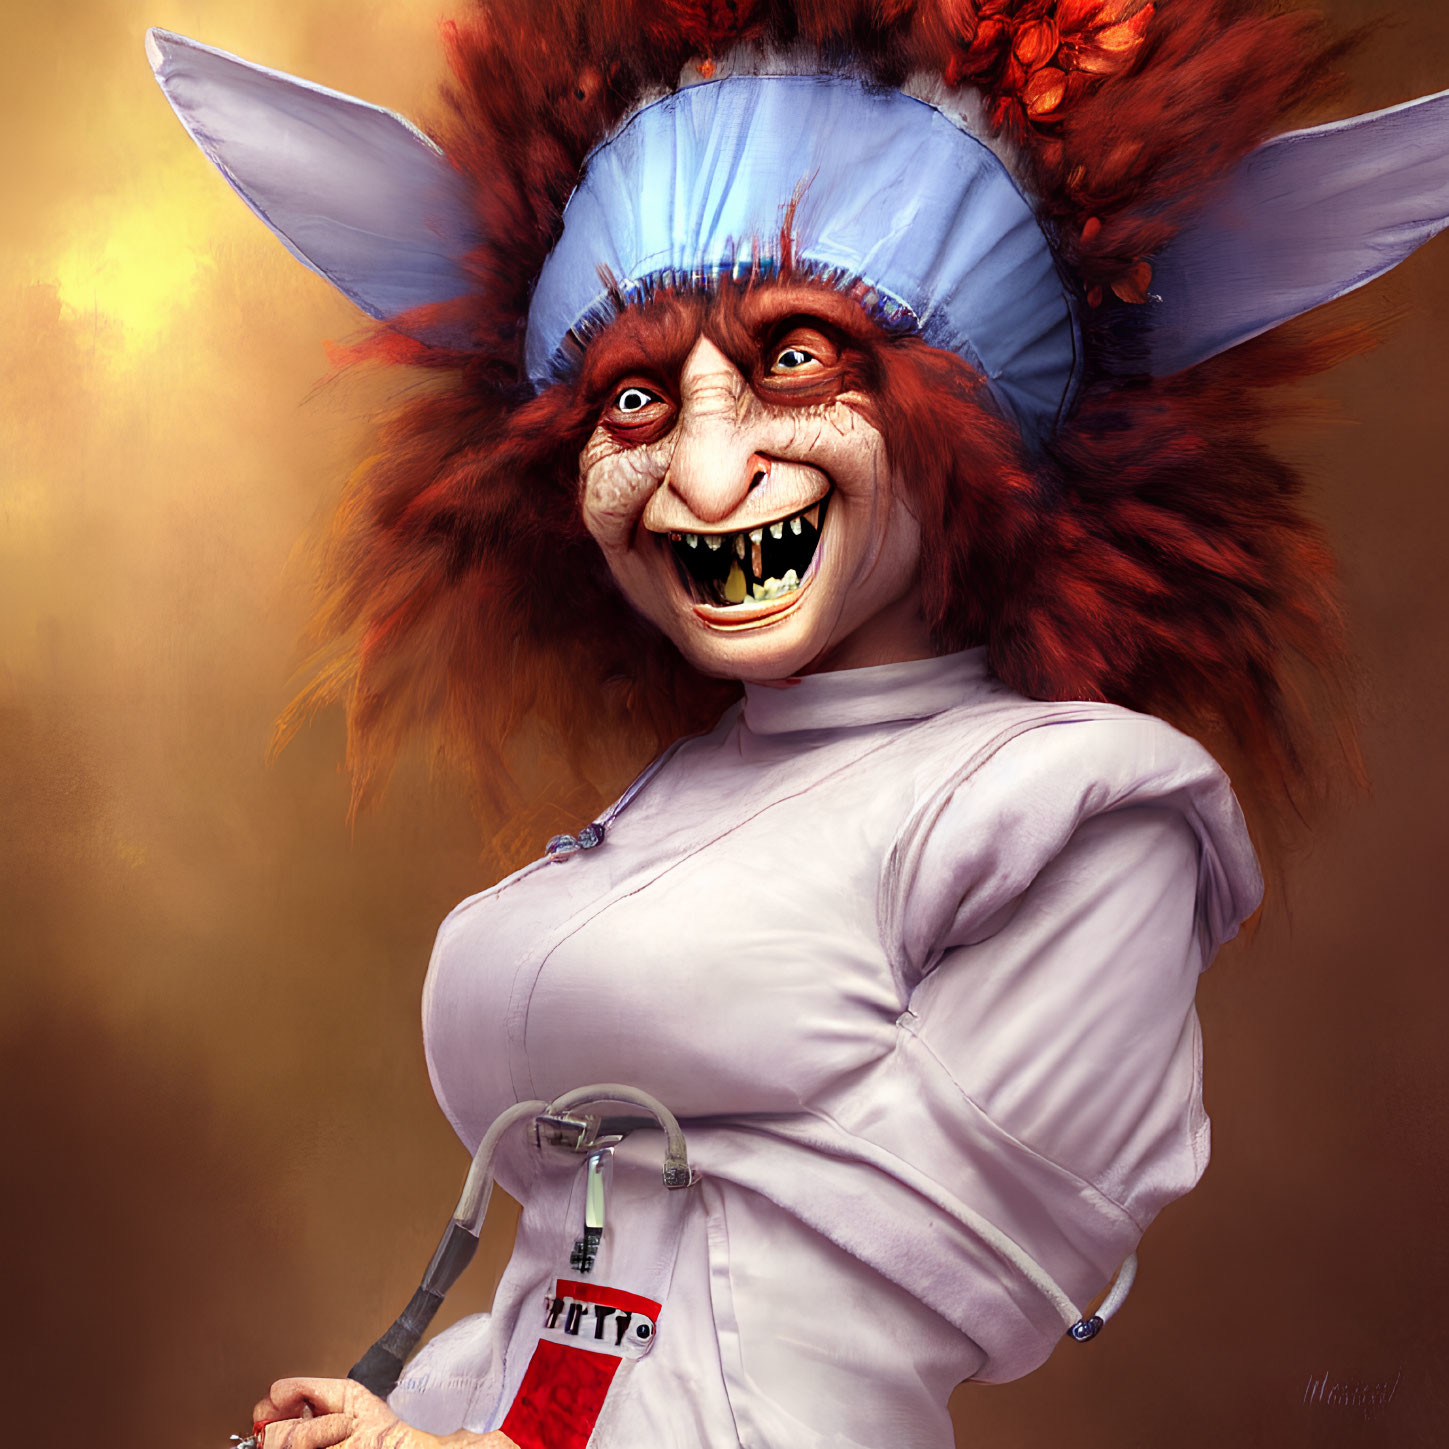 Fantasy creature with large ears, sharp teeth, red eyes in nurse's outfit with syringe